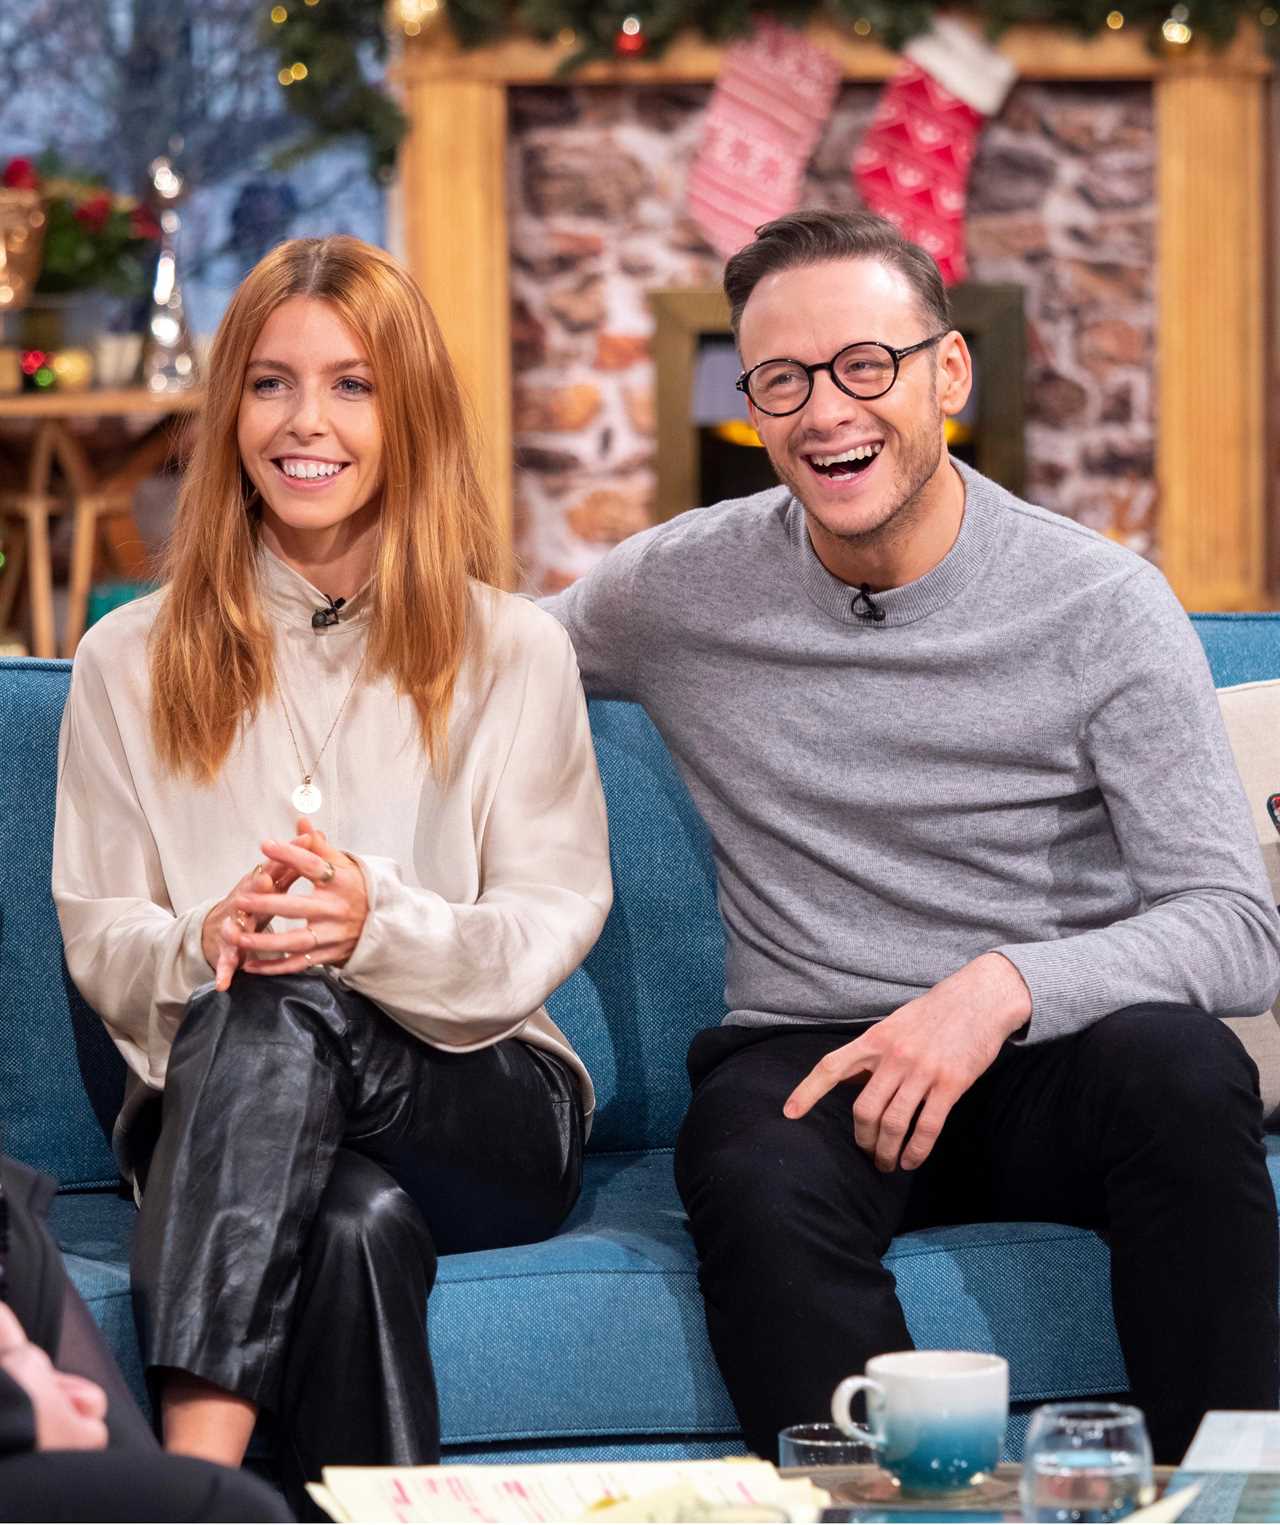 The clever tricks Stacey Dooley used to hide her baby bump revealed